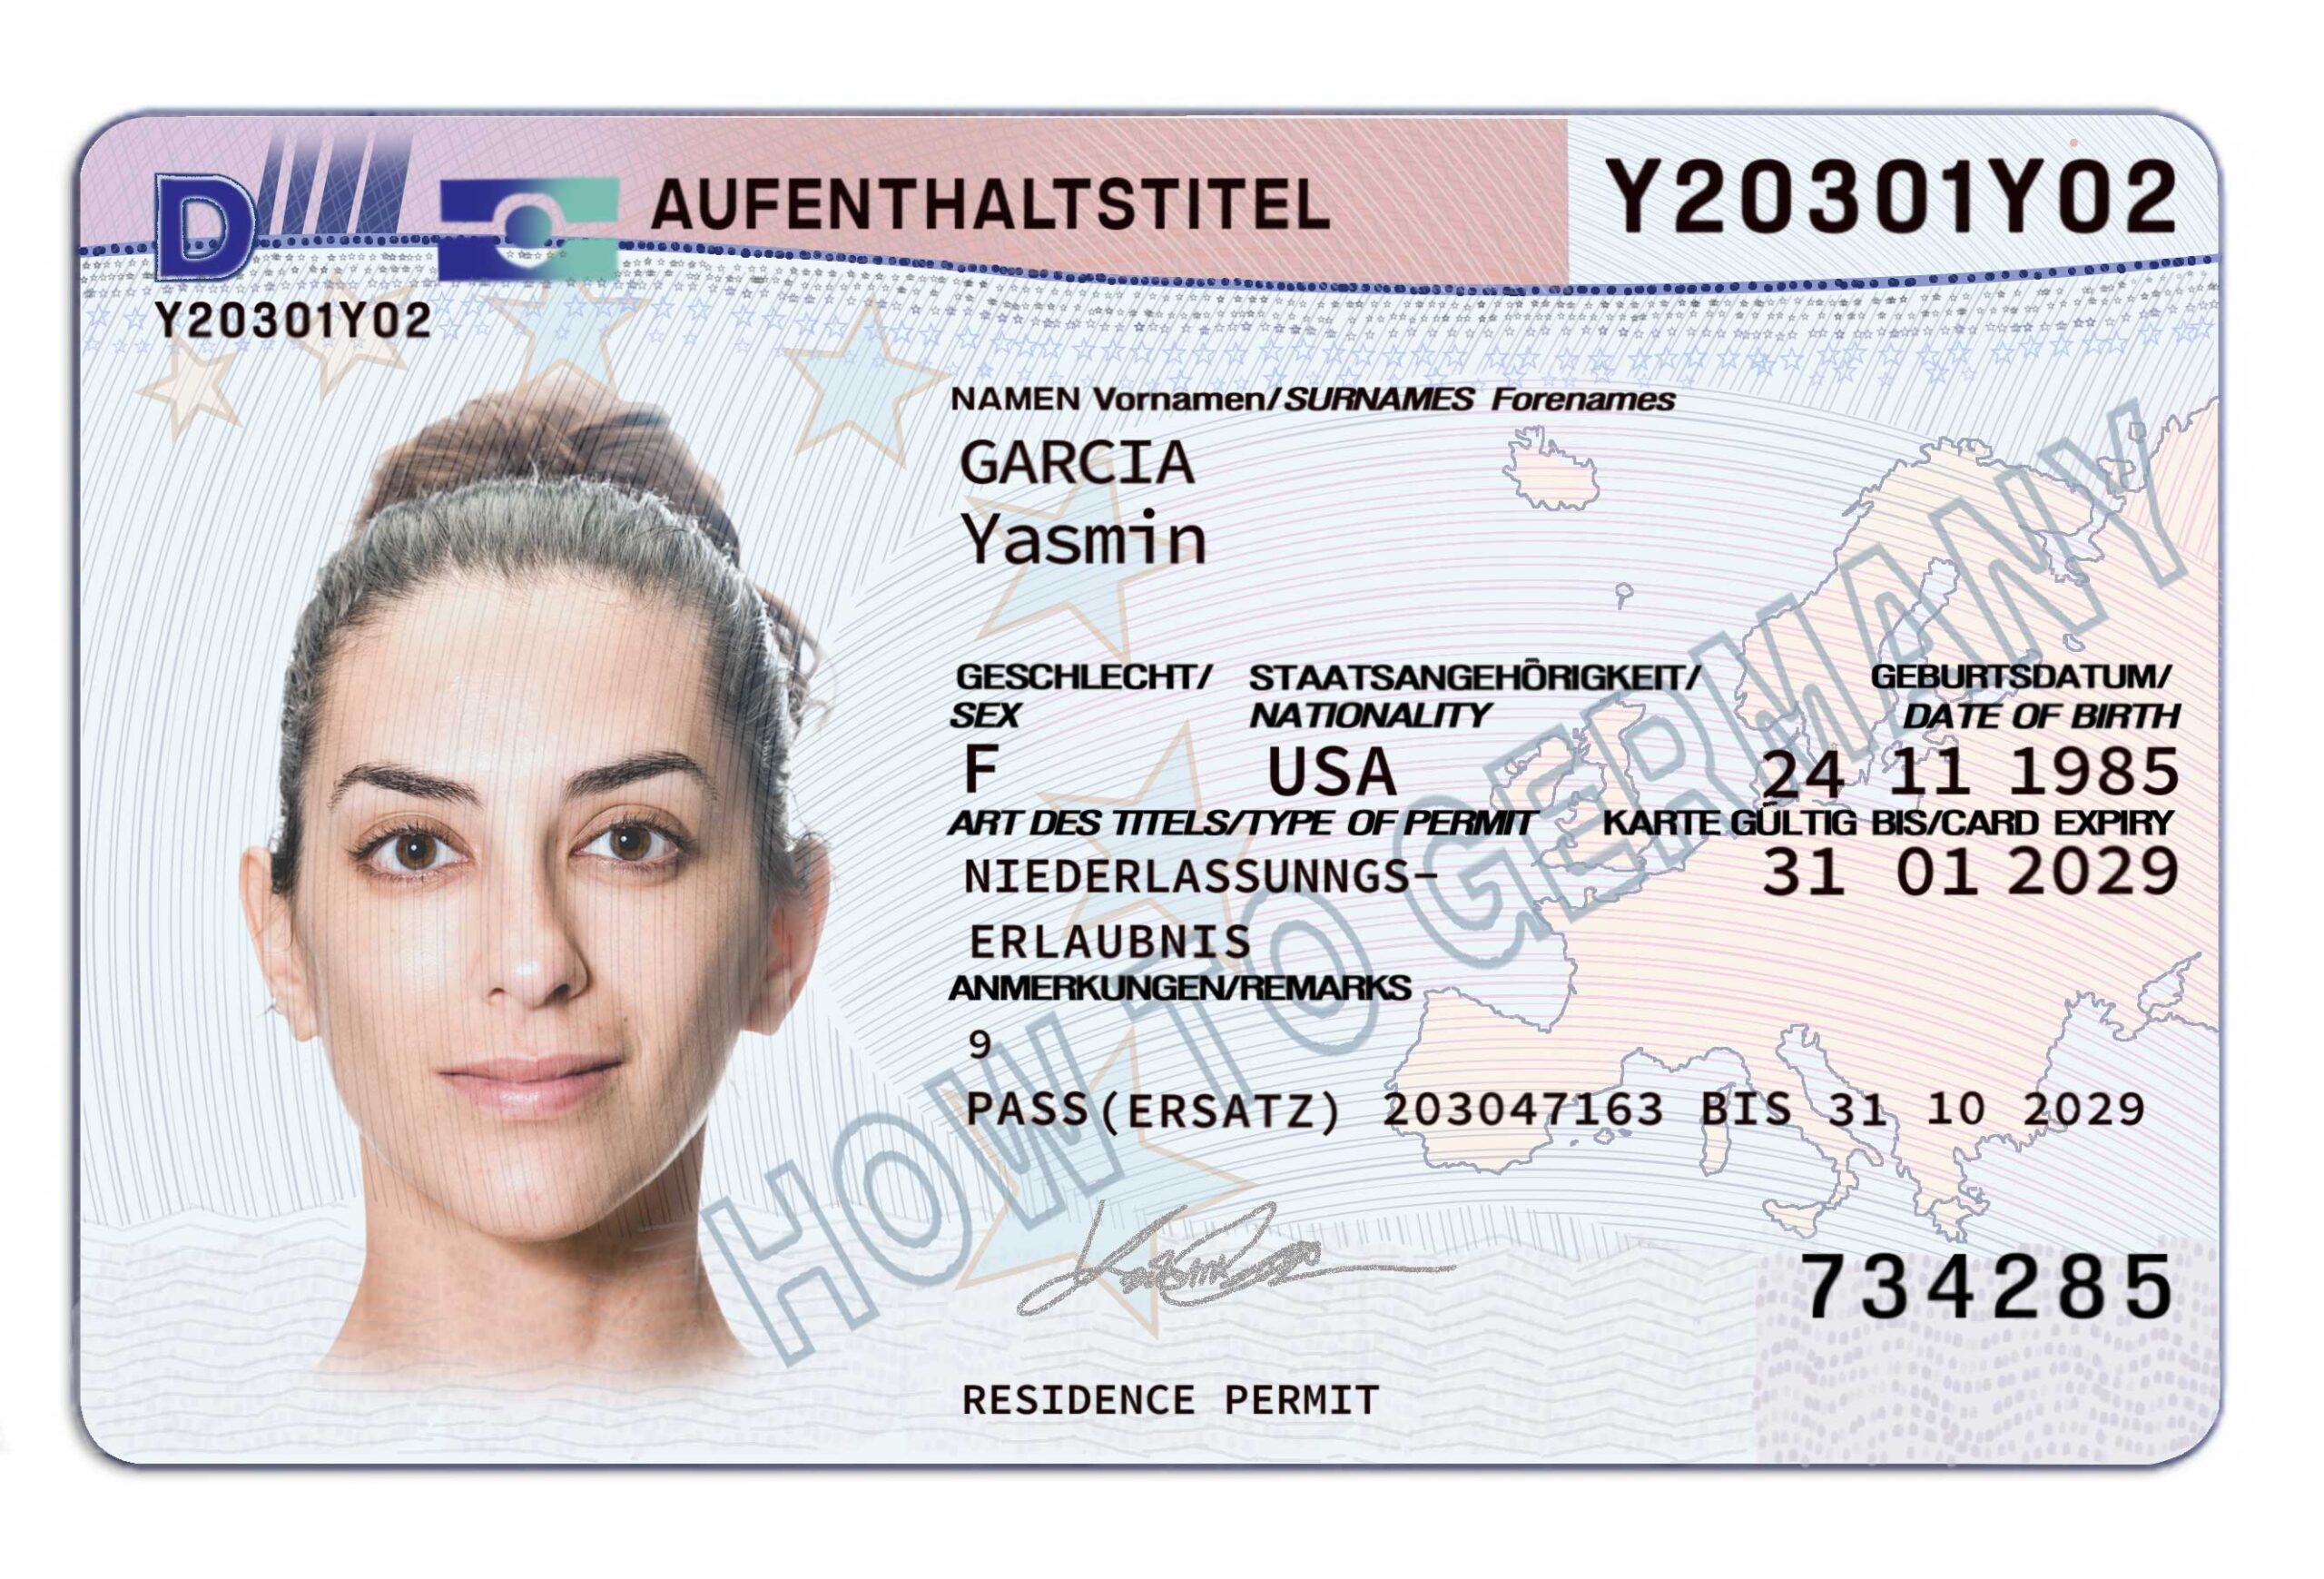 Illustration of the German residency permit